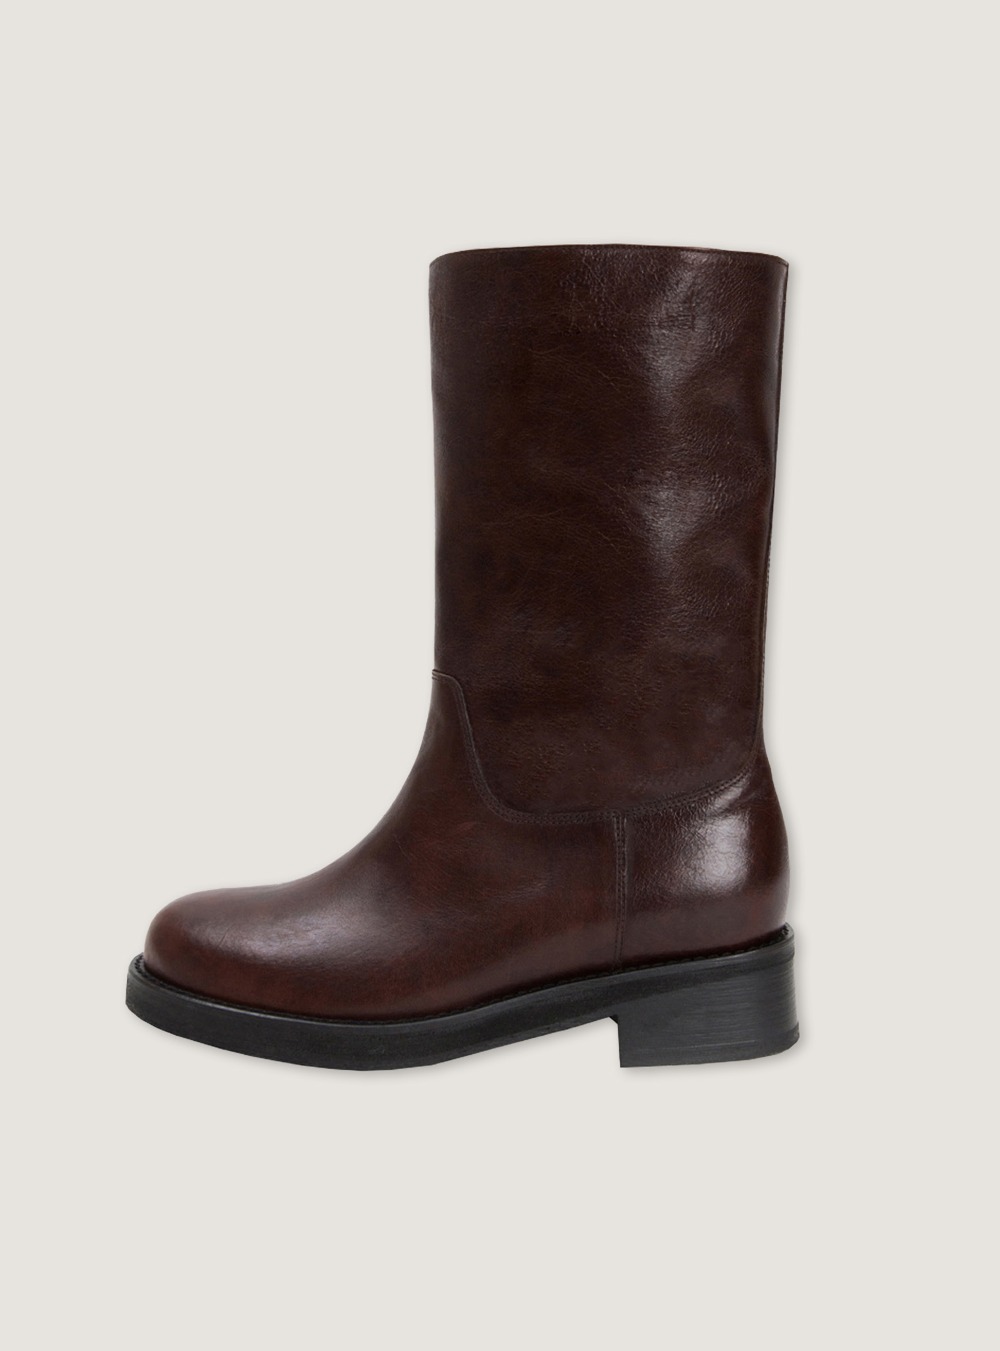 BOROUGH MIDDLE BOOTS - BROWN